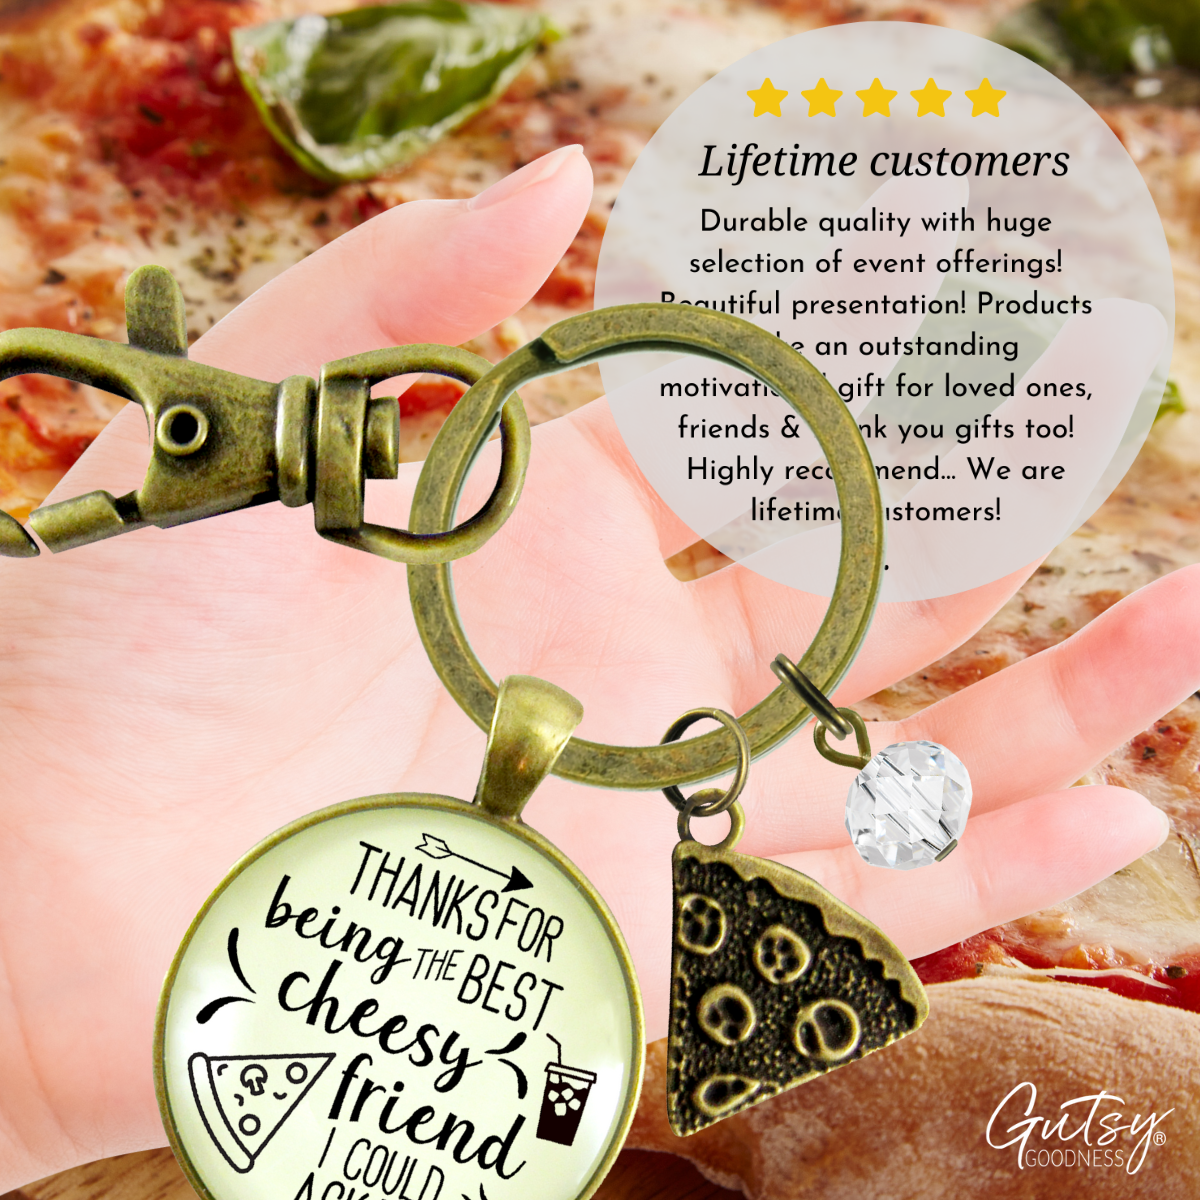 Pizza BFF Keychain Thanks For Being Best Cheesy Pizza Theme Women's Fun Jewelry Slice - Gutsy Goodness Handmade Jewelry;Pizza Bff Keychain Thanks For Being Best Cheesy Pizza Theme Women's Fun Jewelry Slice - Gutsy Goodness Handmade Jewelry Gifts